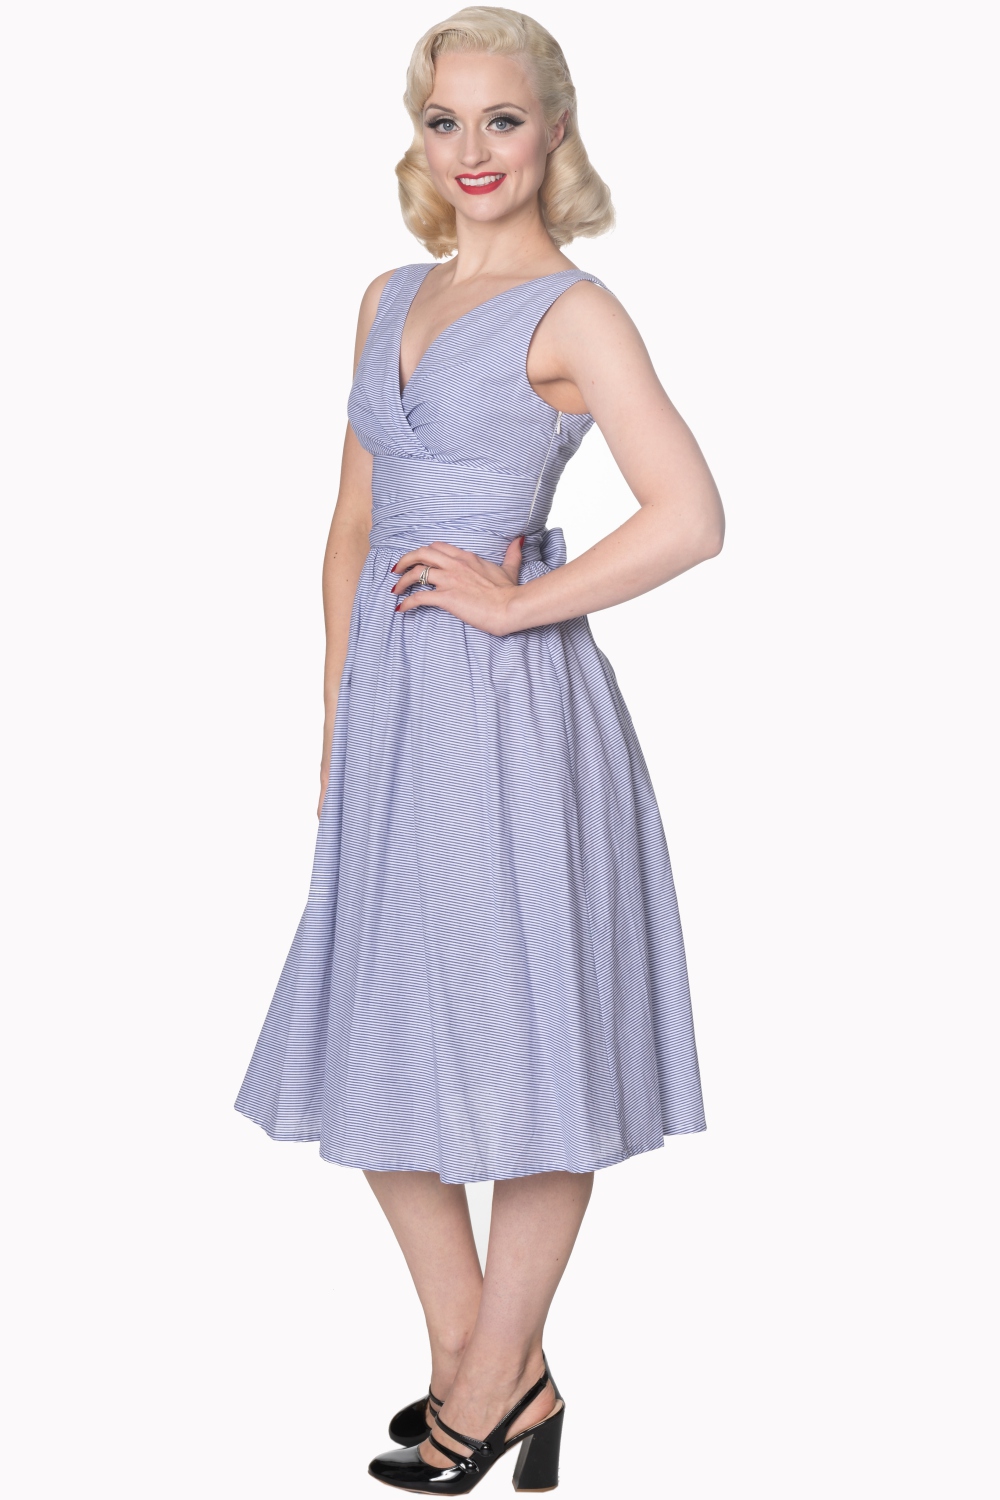 Dancing Days 50s Striped Blue And White Swing Dress